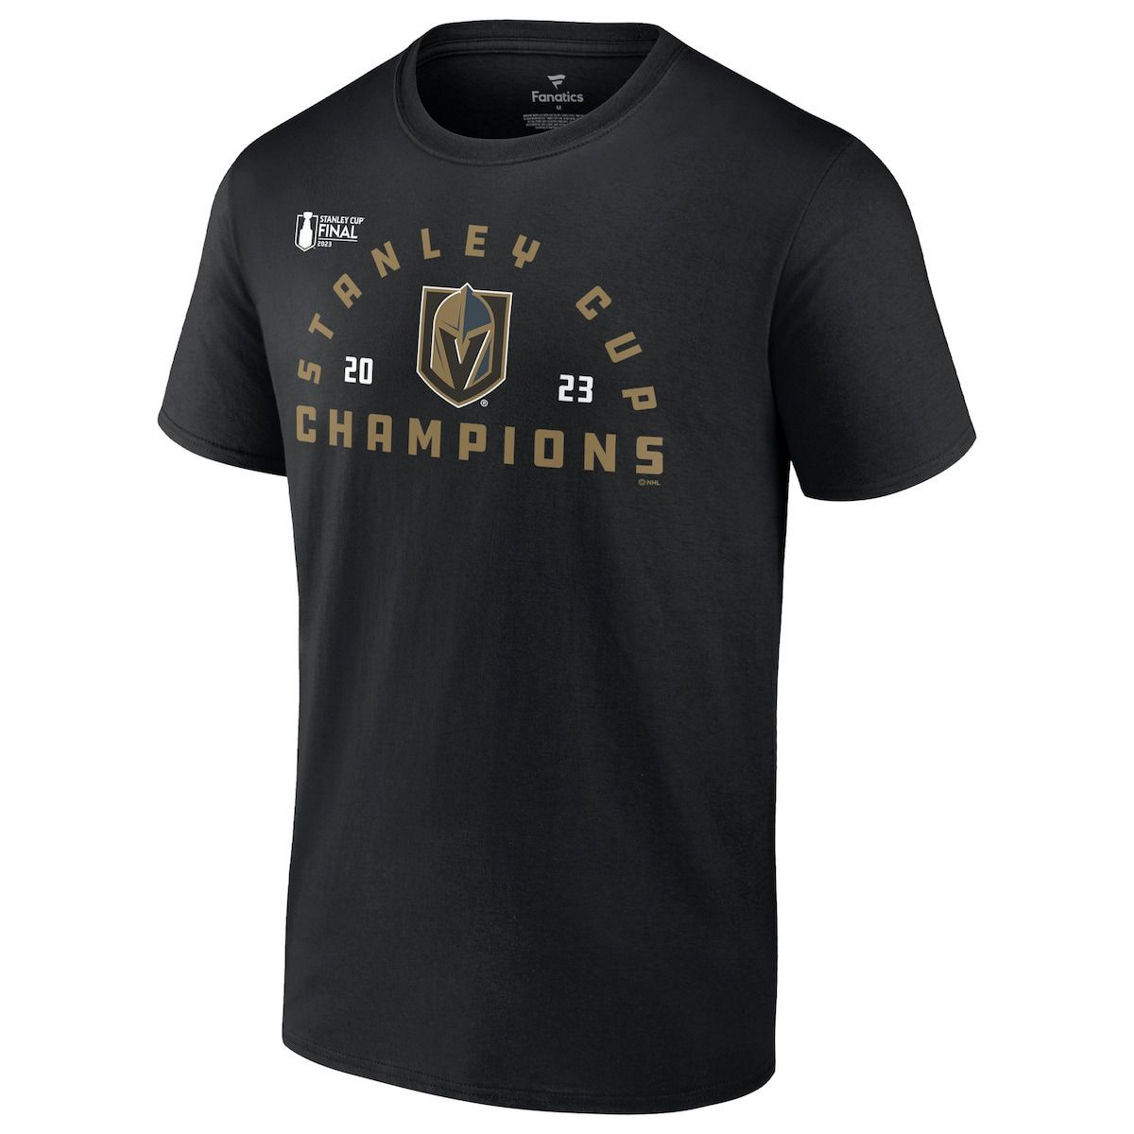 Fanatics Branded Men's Black Vegas Golden Knights 2023 Stanley Cup s Jersey Roster T-Shirt - Image 3 of 4